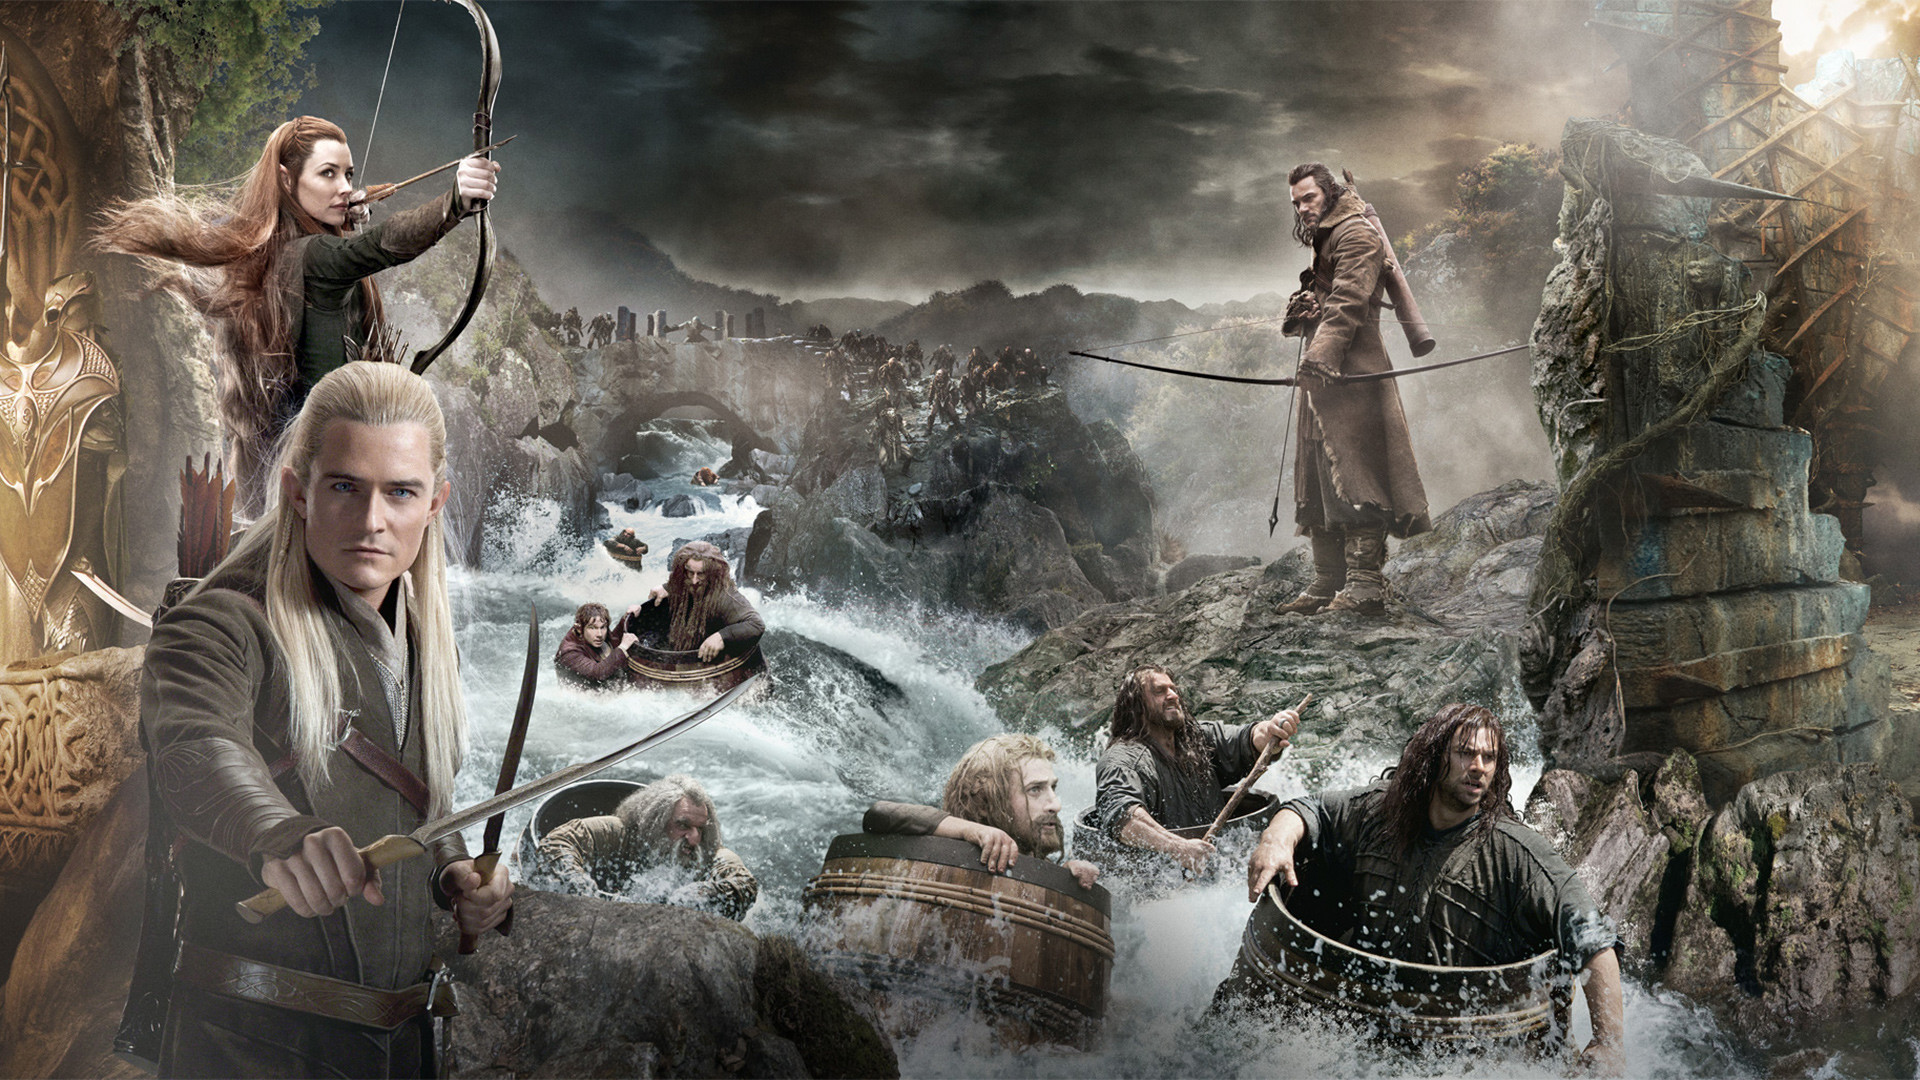 1920x1080  The Hobbit: The Desolation of Smaug Characters desktop PC and Mac  wallpaper